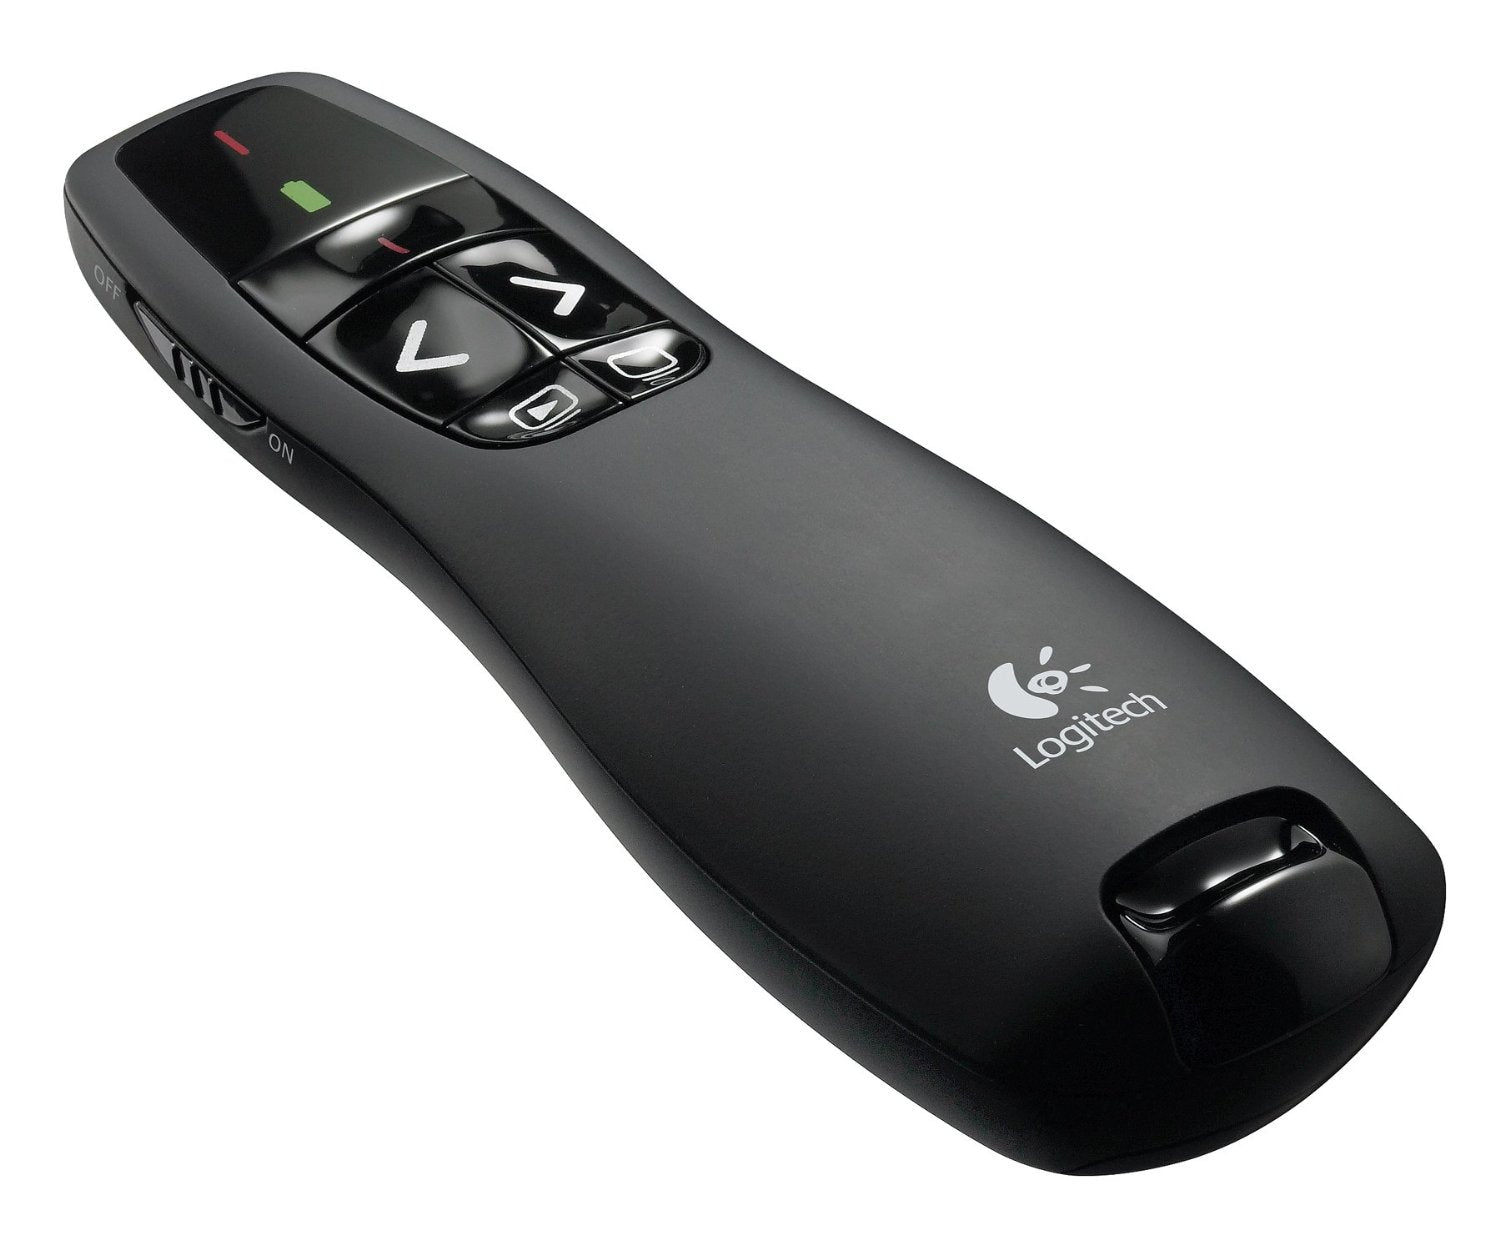 Logitech R400 Wireless Presenter: Intuitive Controls and Red Laser Pointer